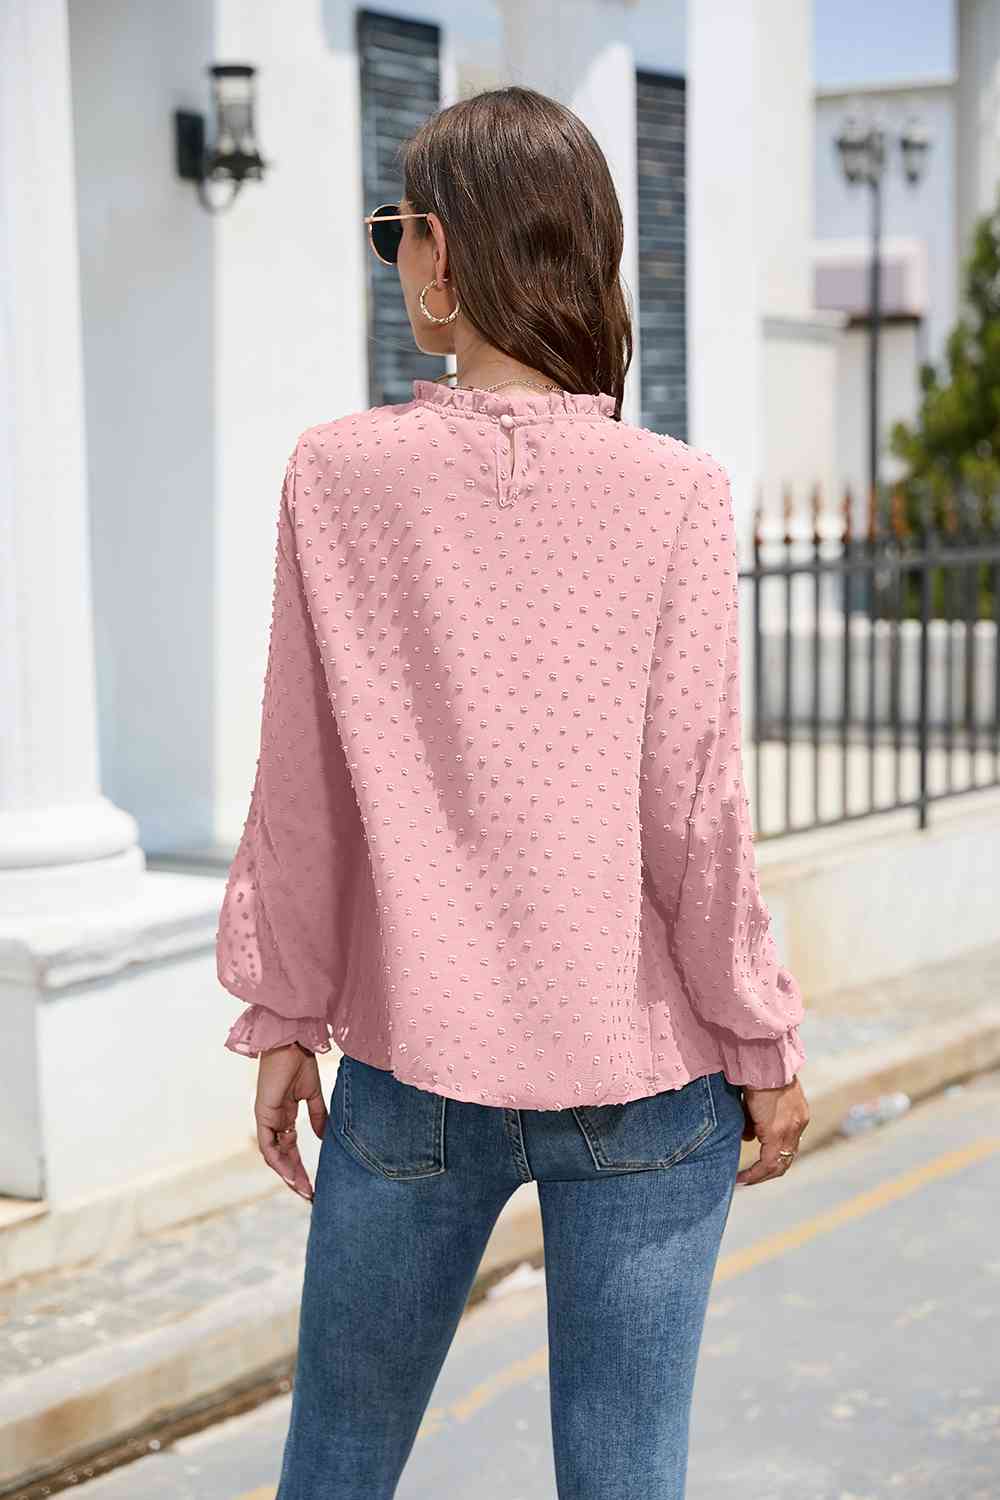 Smocked Mock Neck Swiss Dot Top - Women’s Clothing & Accessories - Shirts & Tops - 20 - 2024